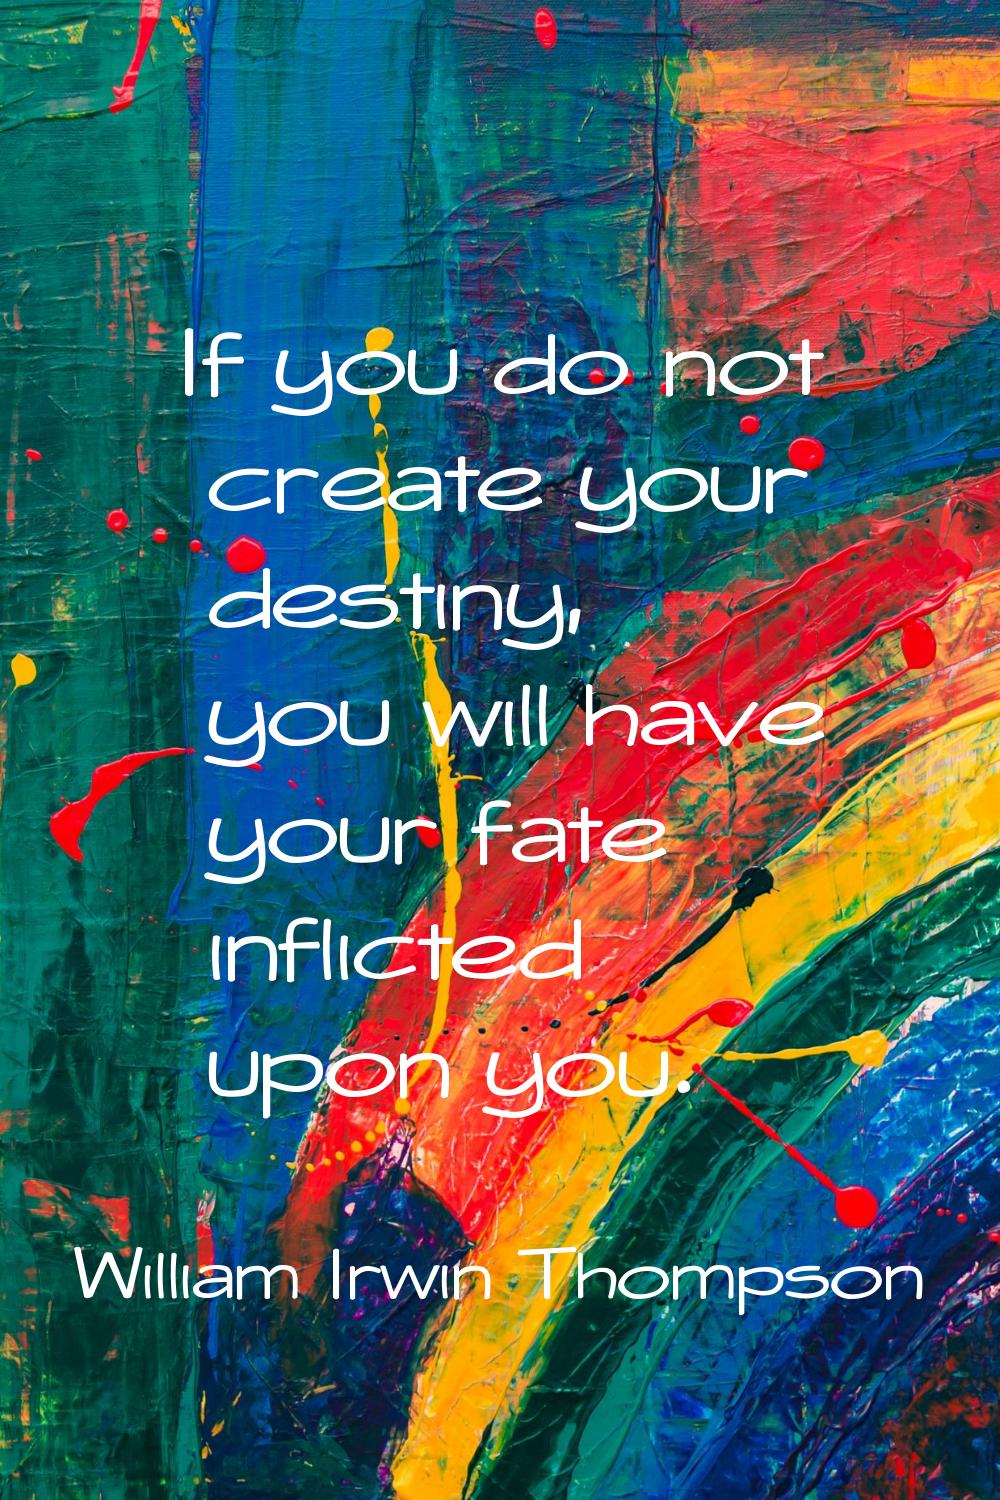 If you do not create your destiny, you will have your fate inflicted upon you.